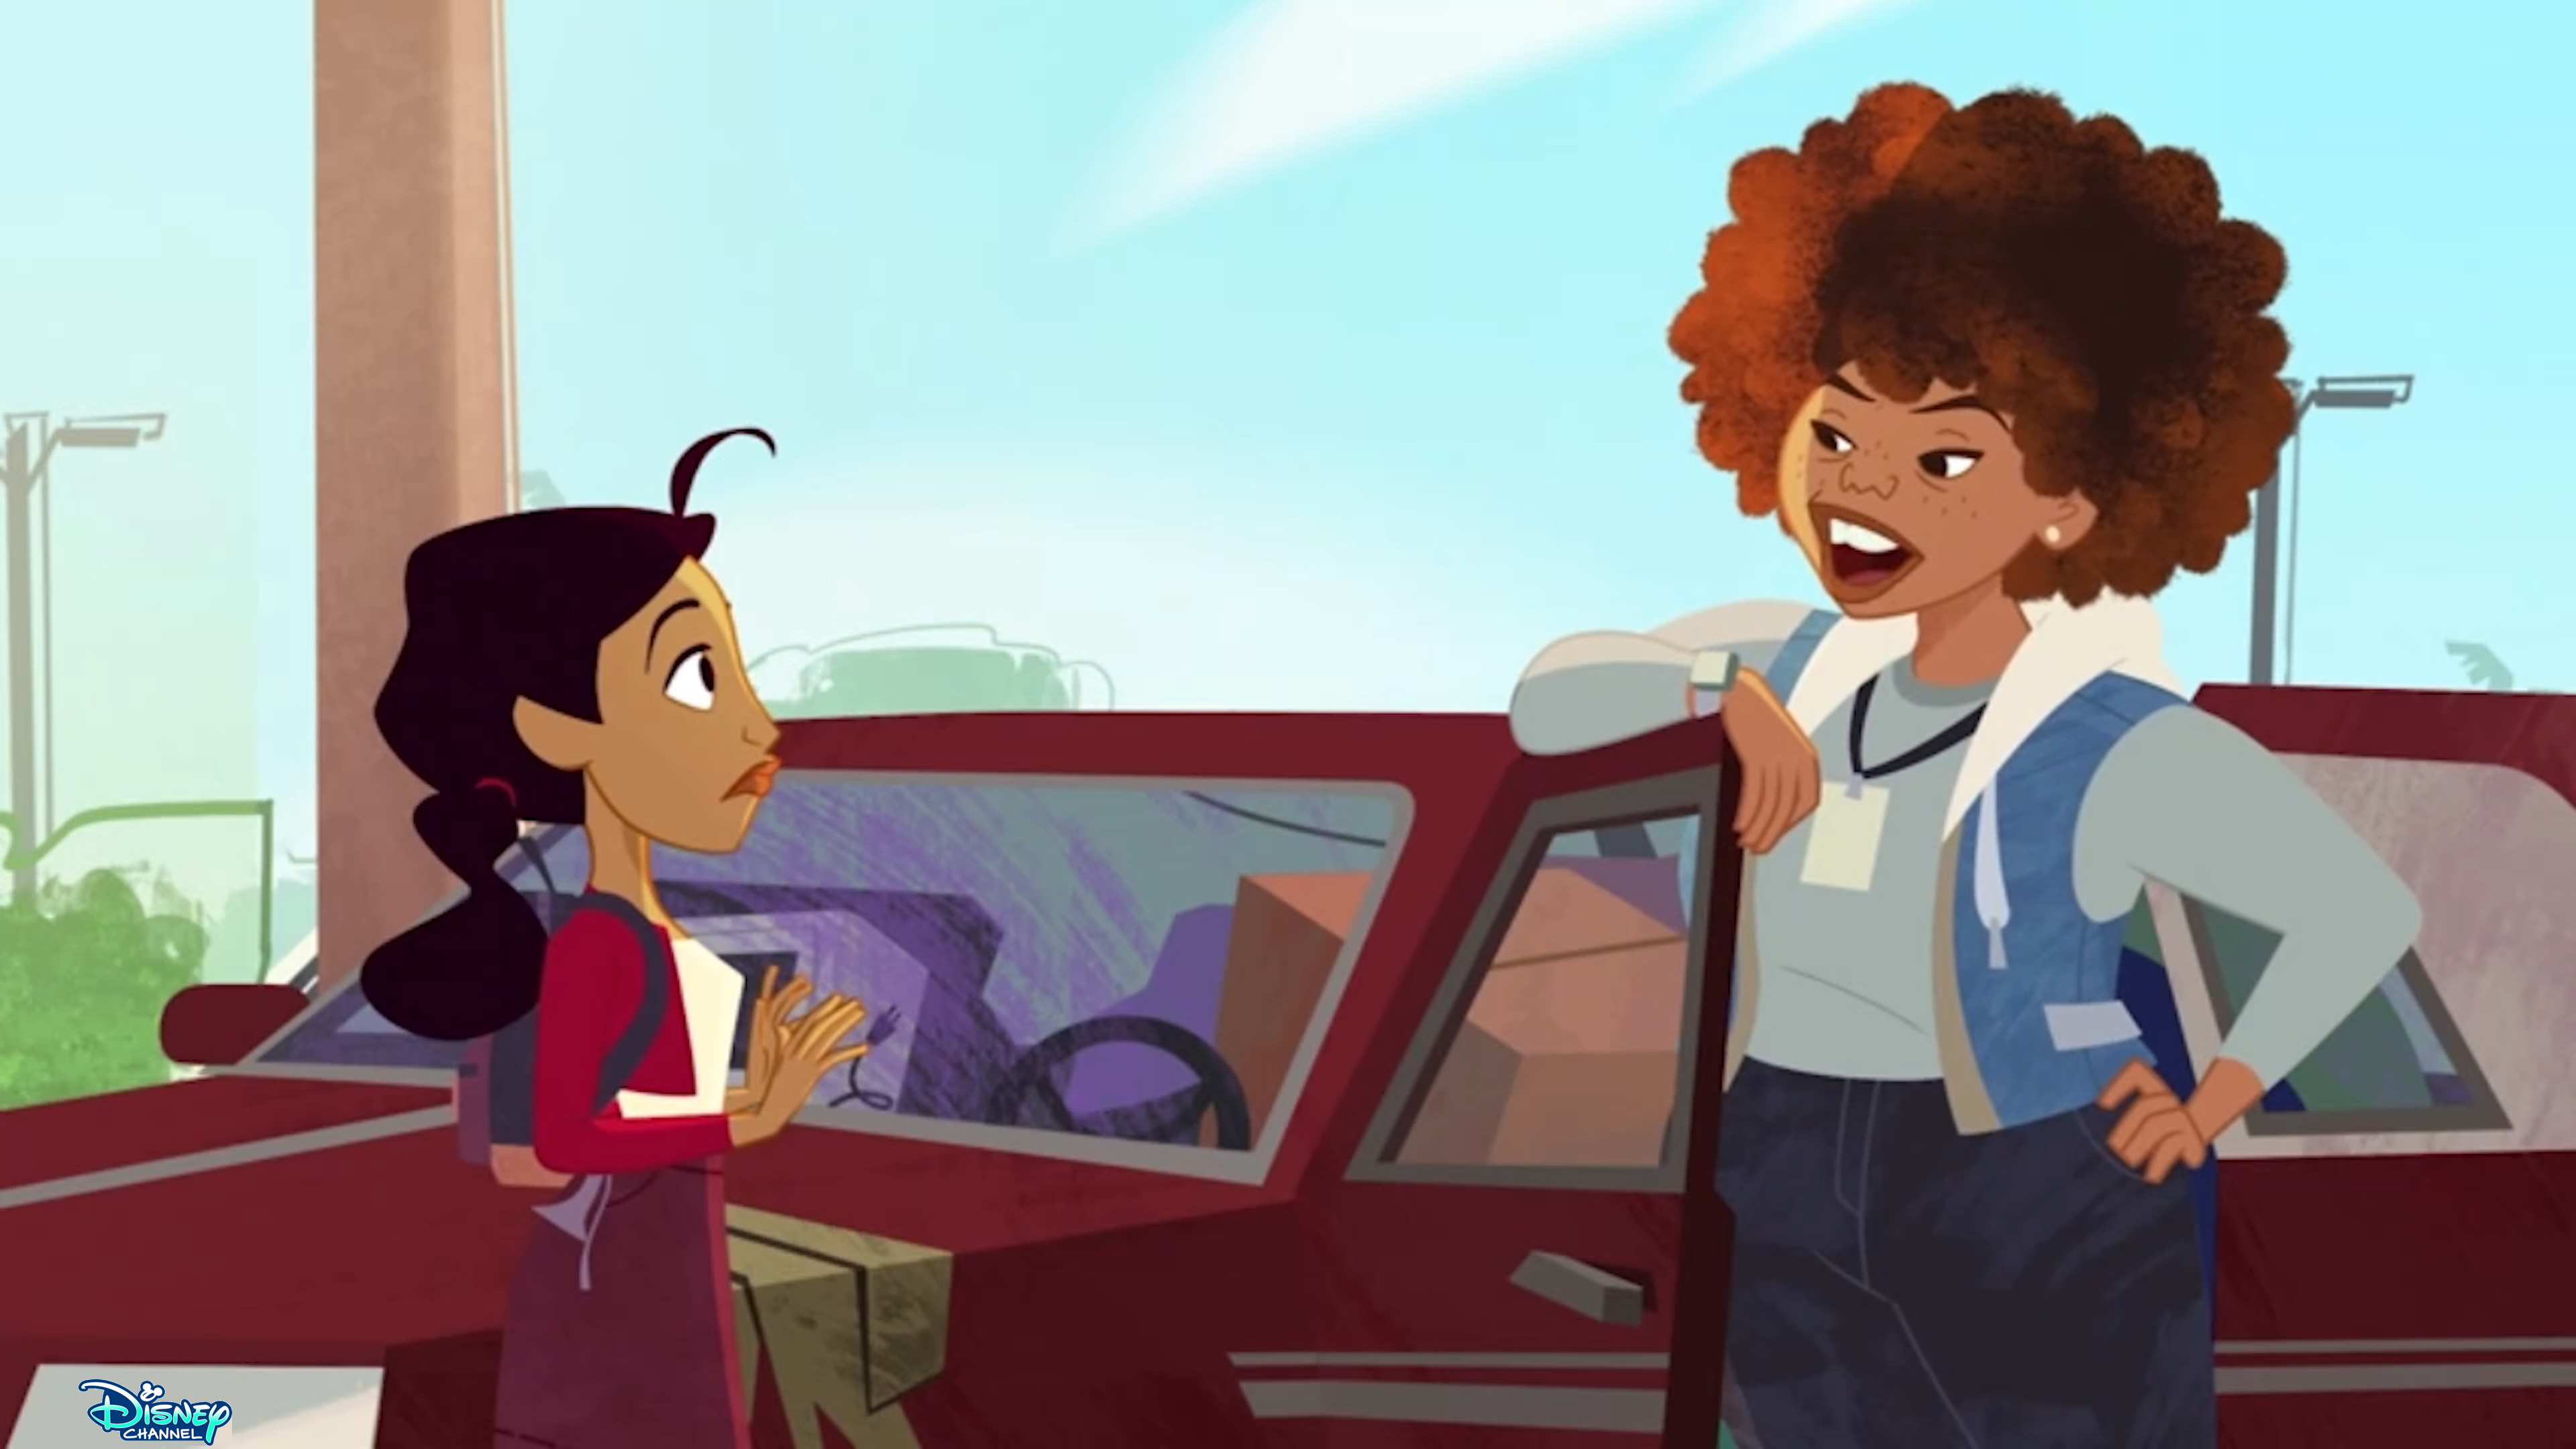  The Proud Family: Louder and Prouder - início School Promo disney Channel 1